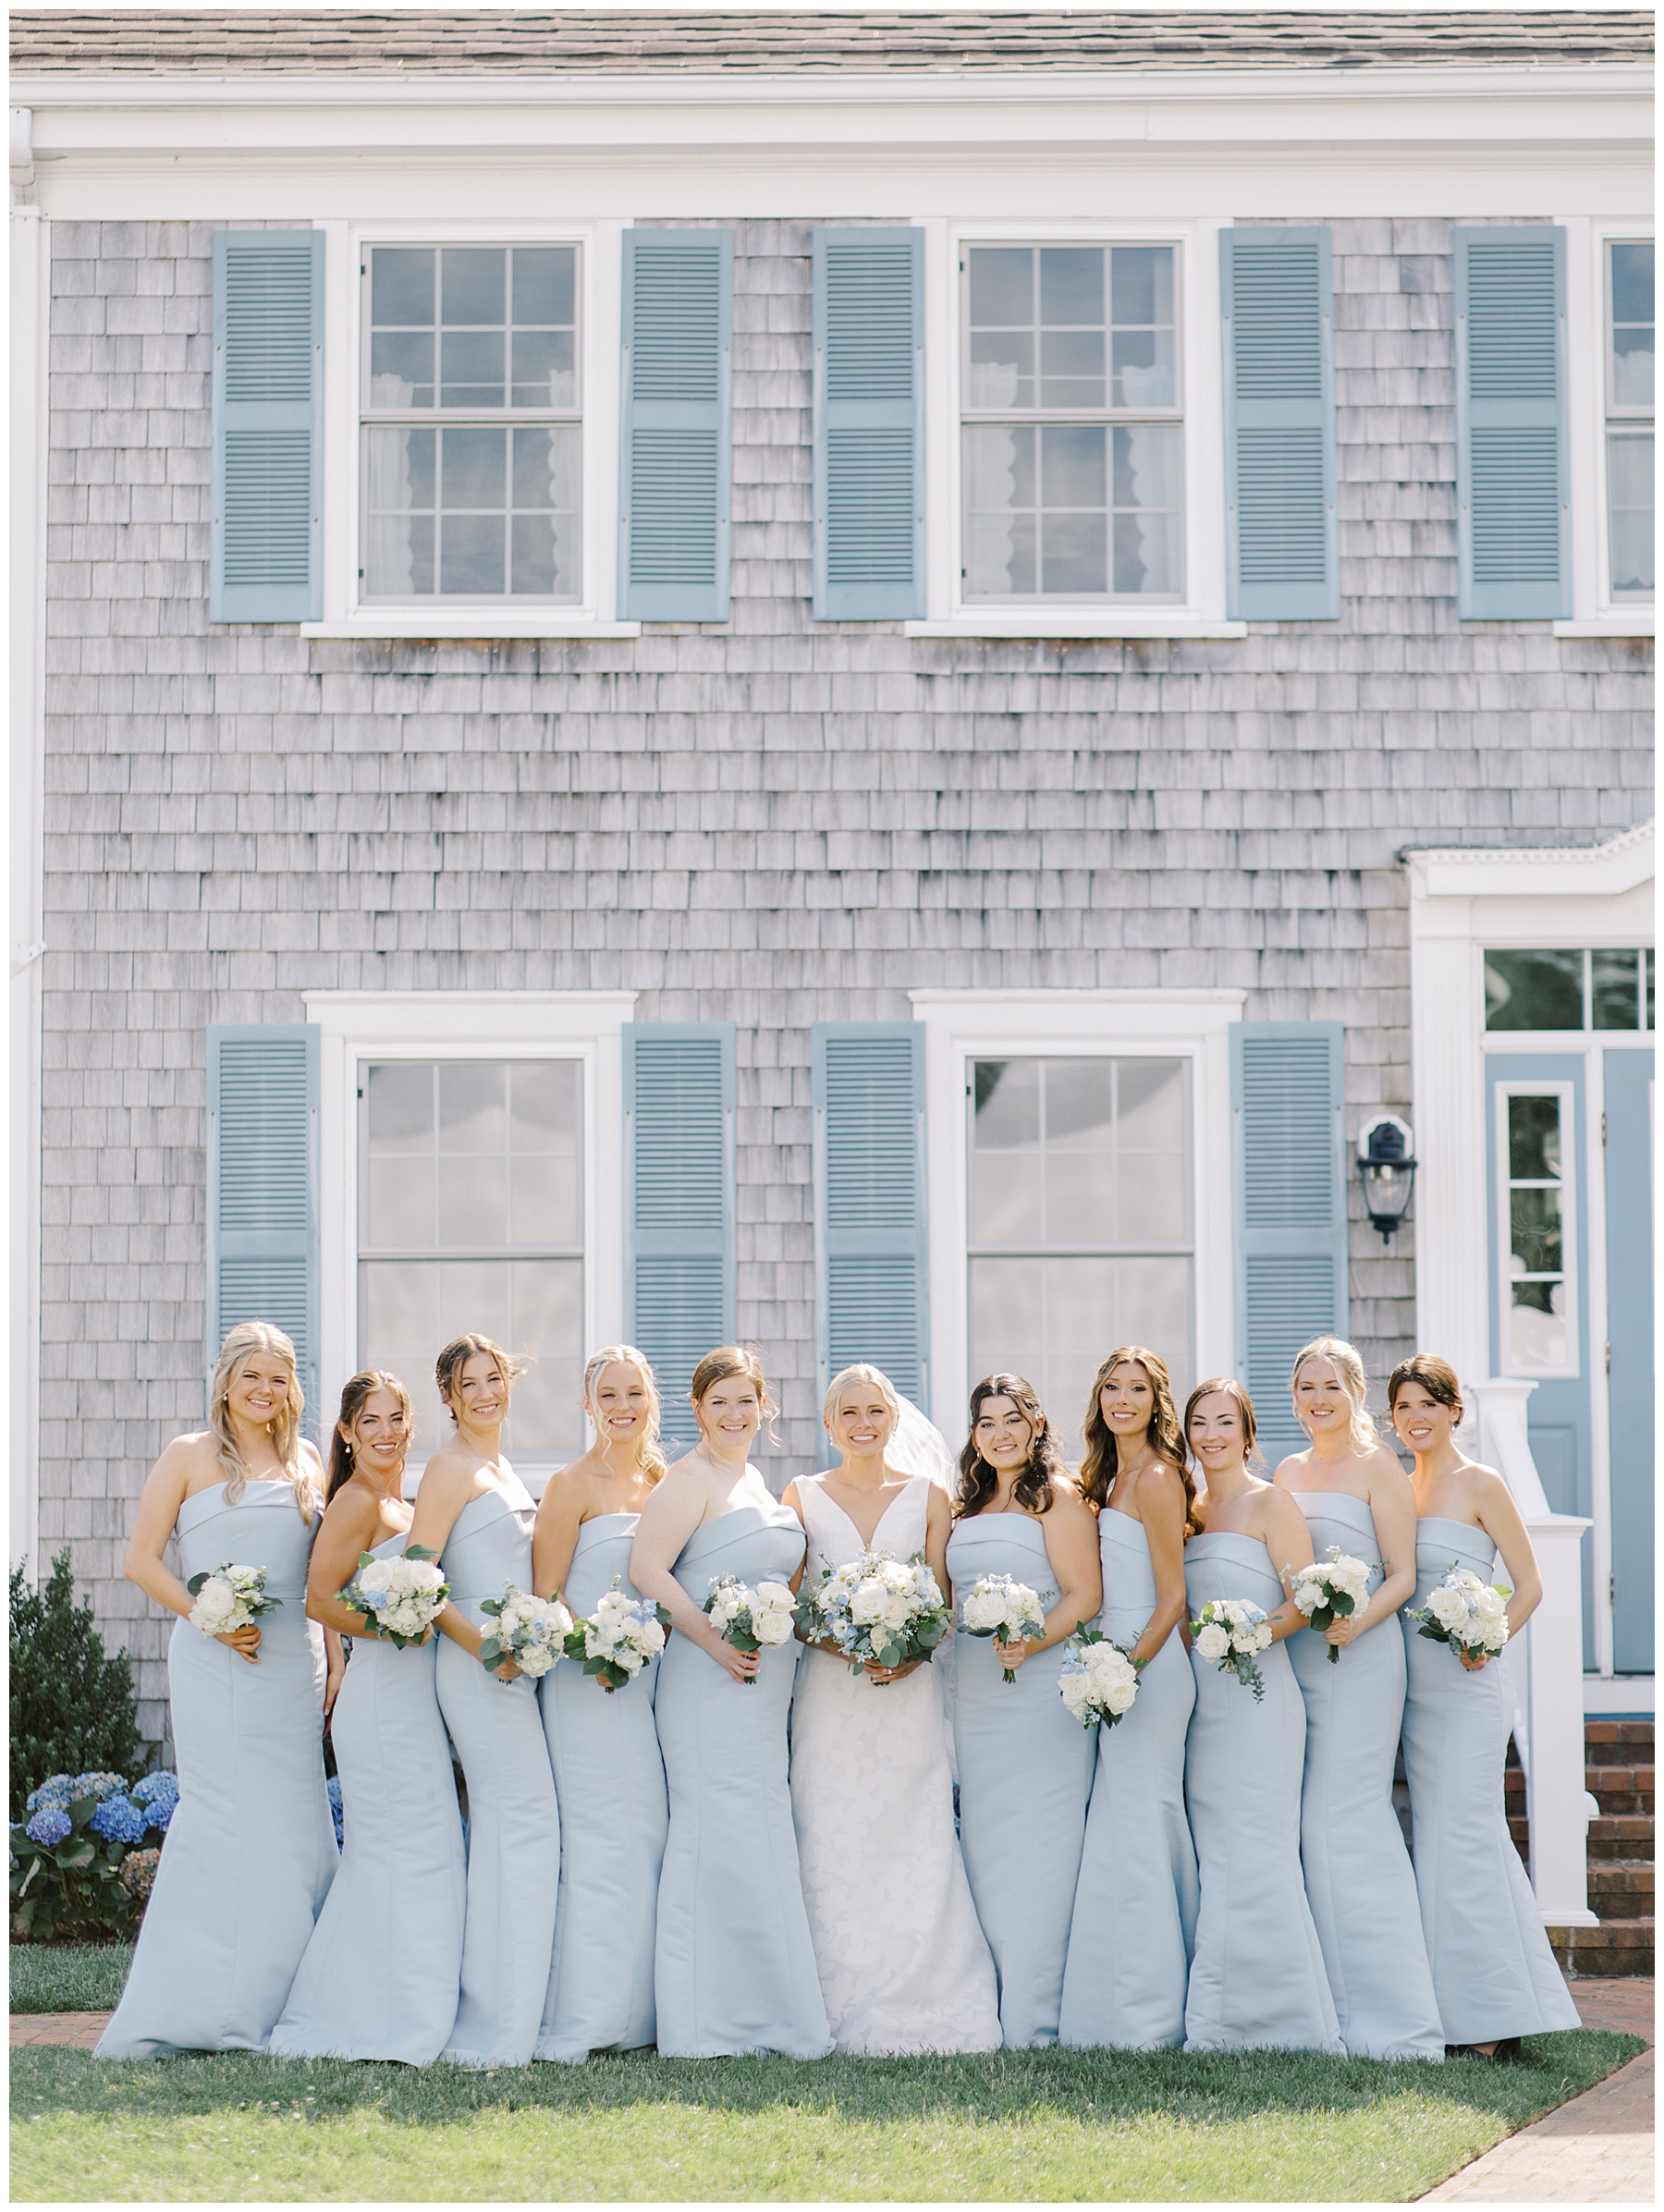 bride and bridesmaids in dusty blue dresses and elegant white wedding bouquets